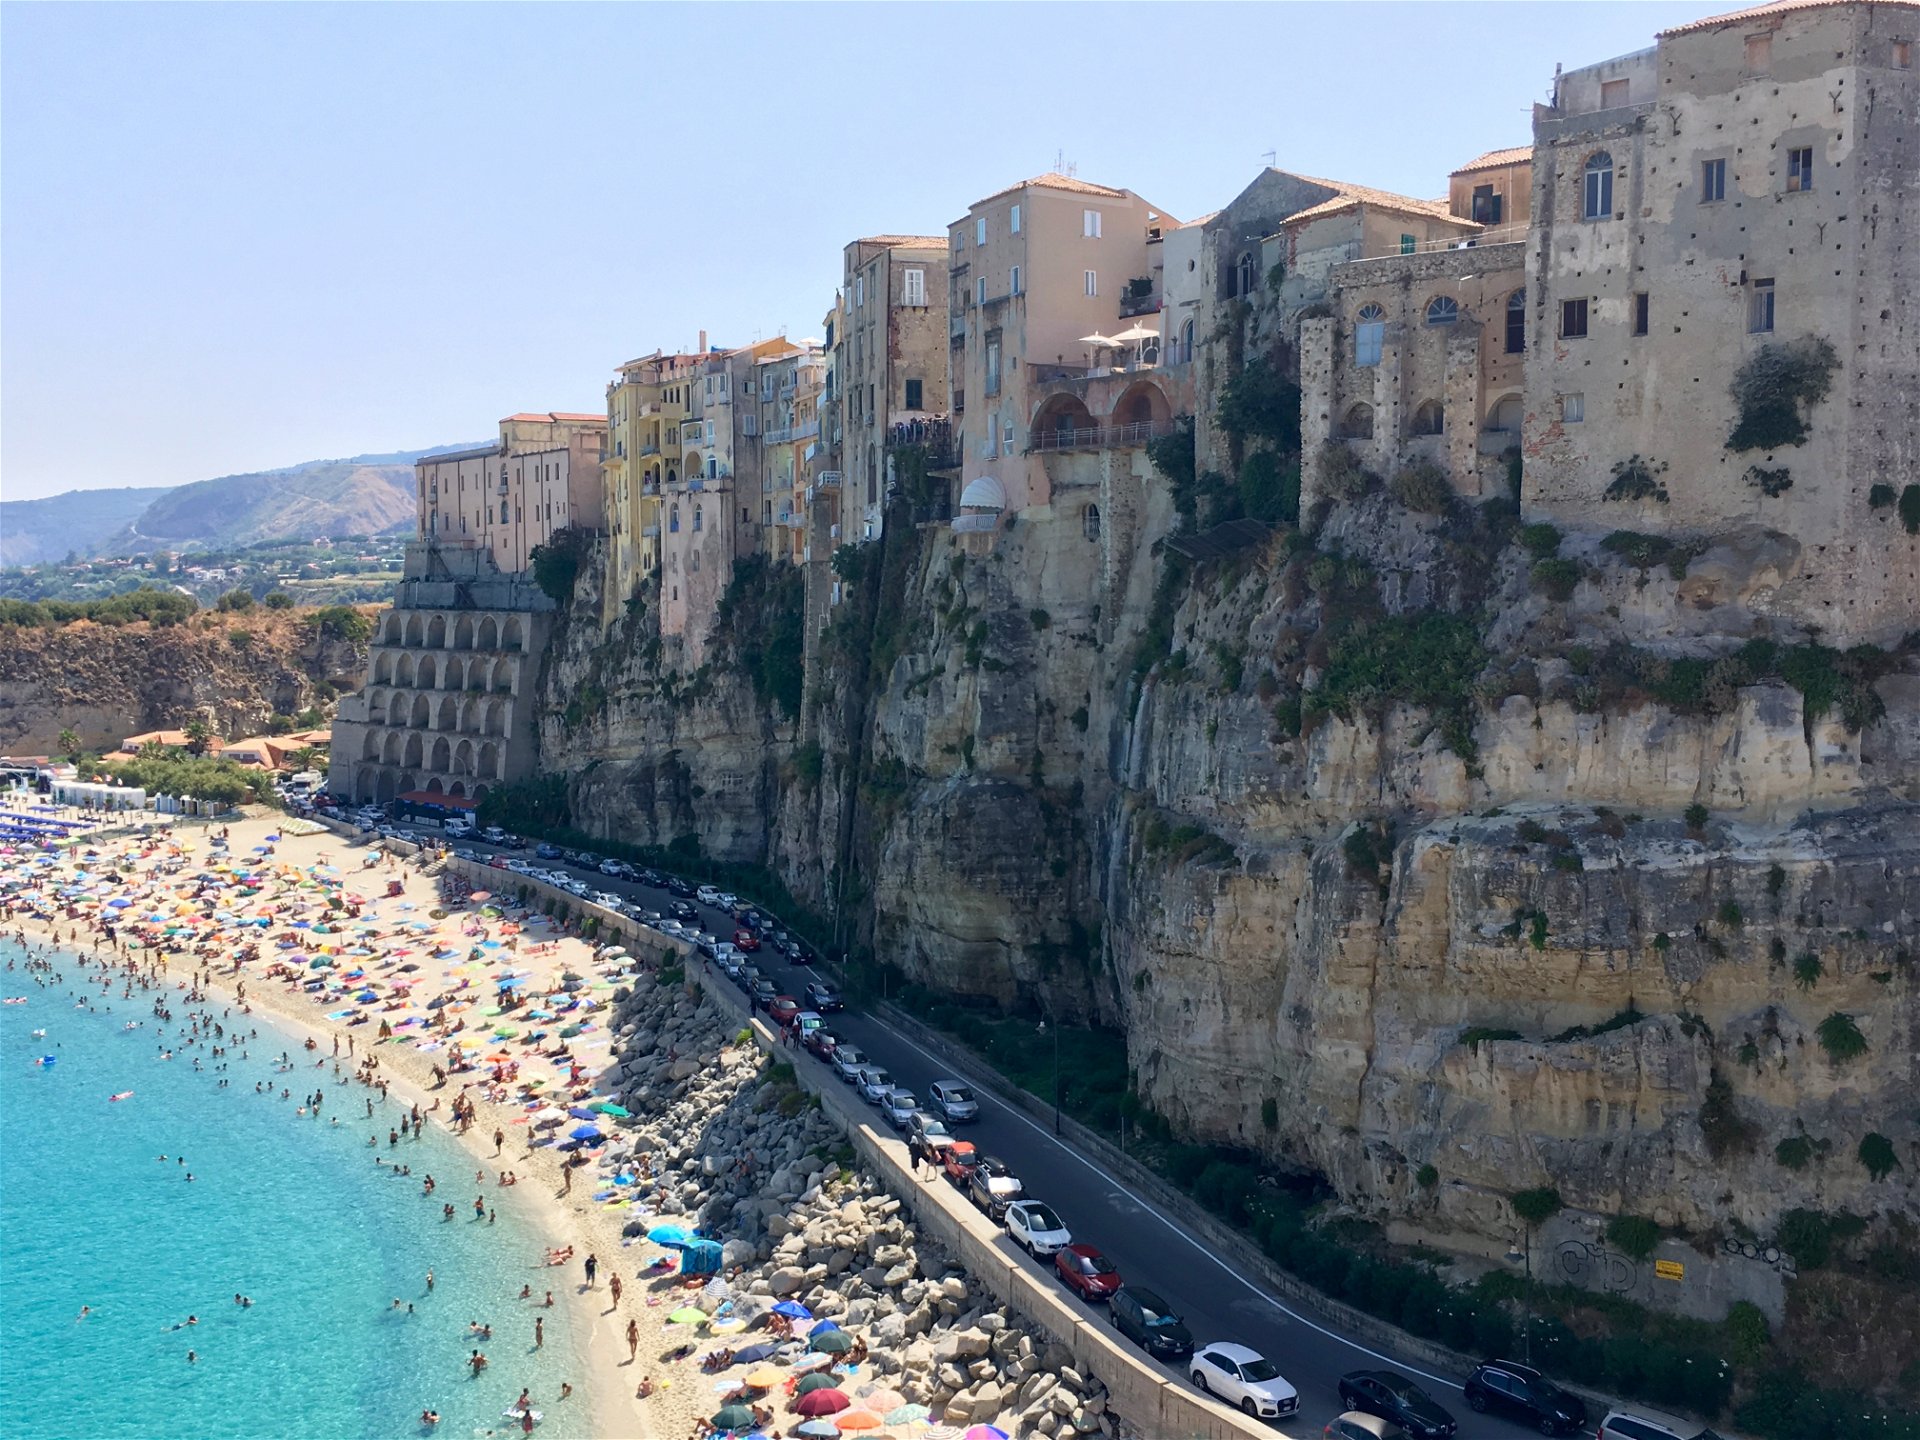 Town of Tropea